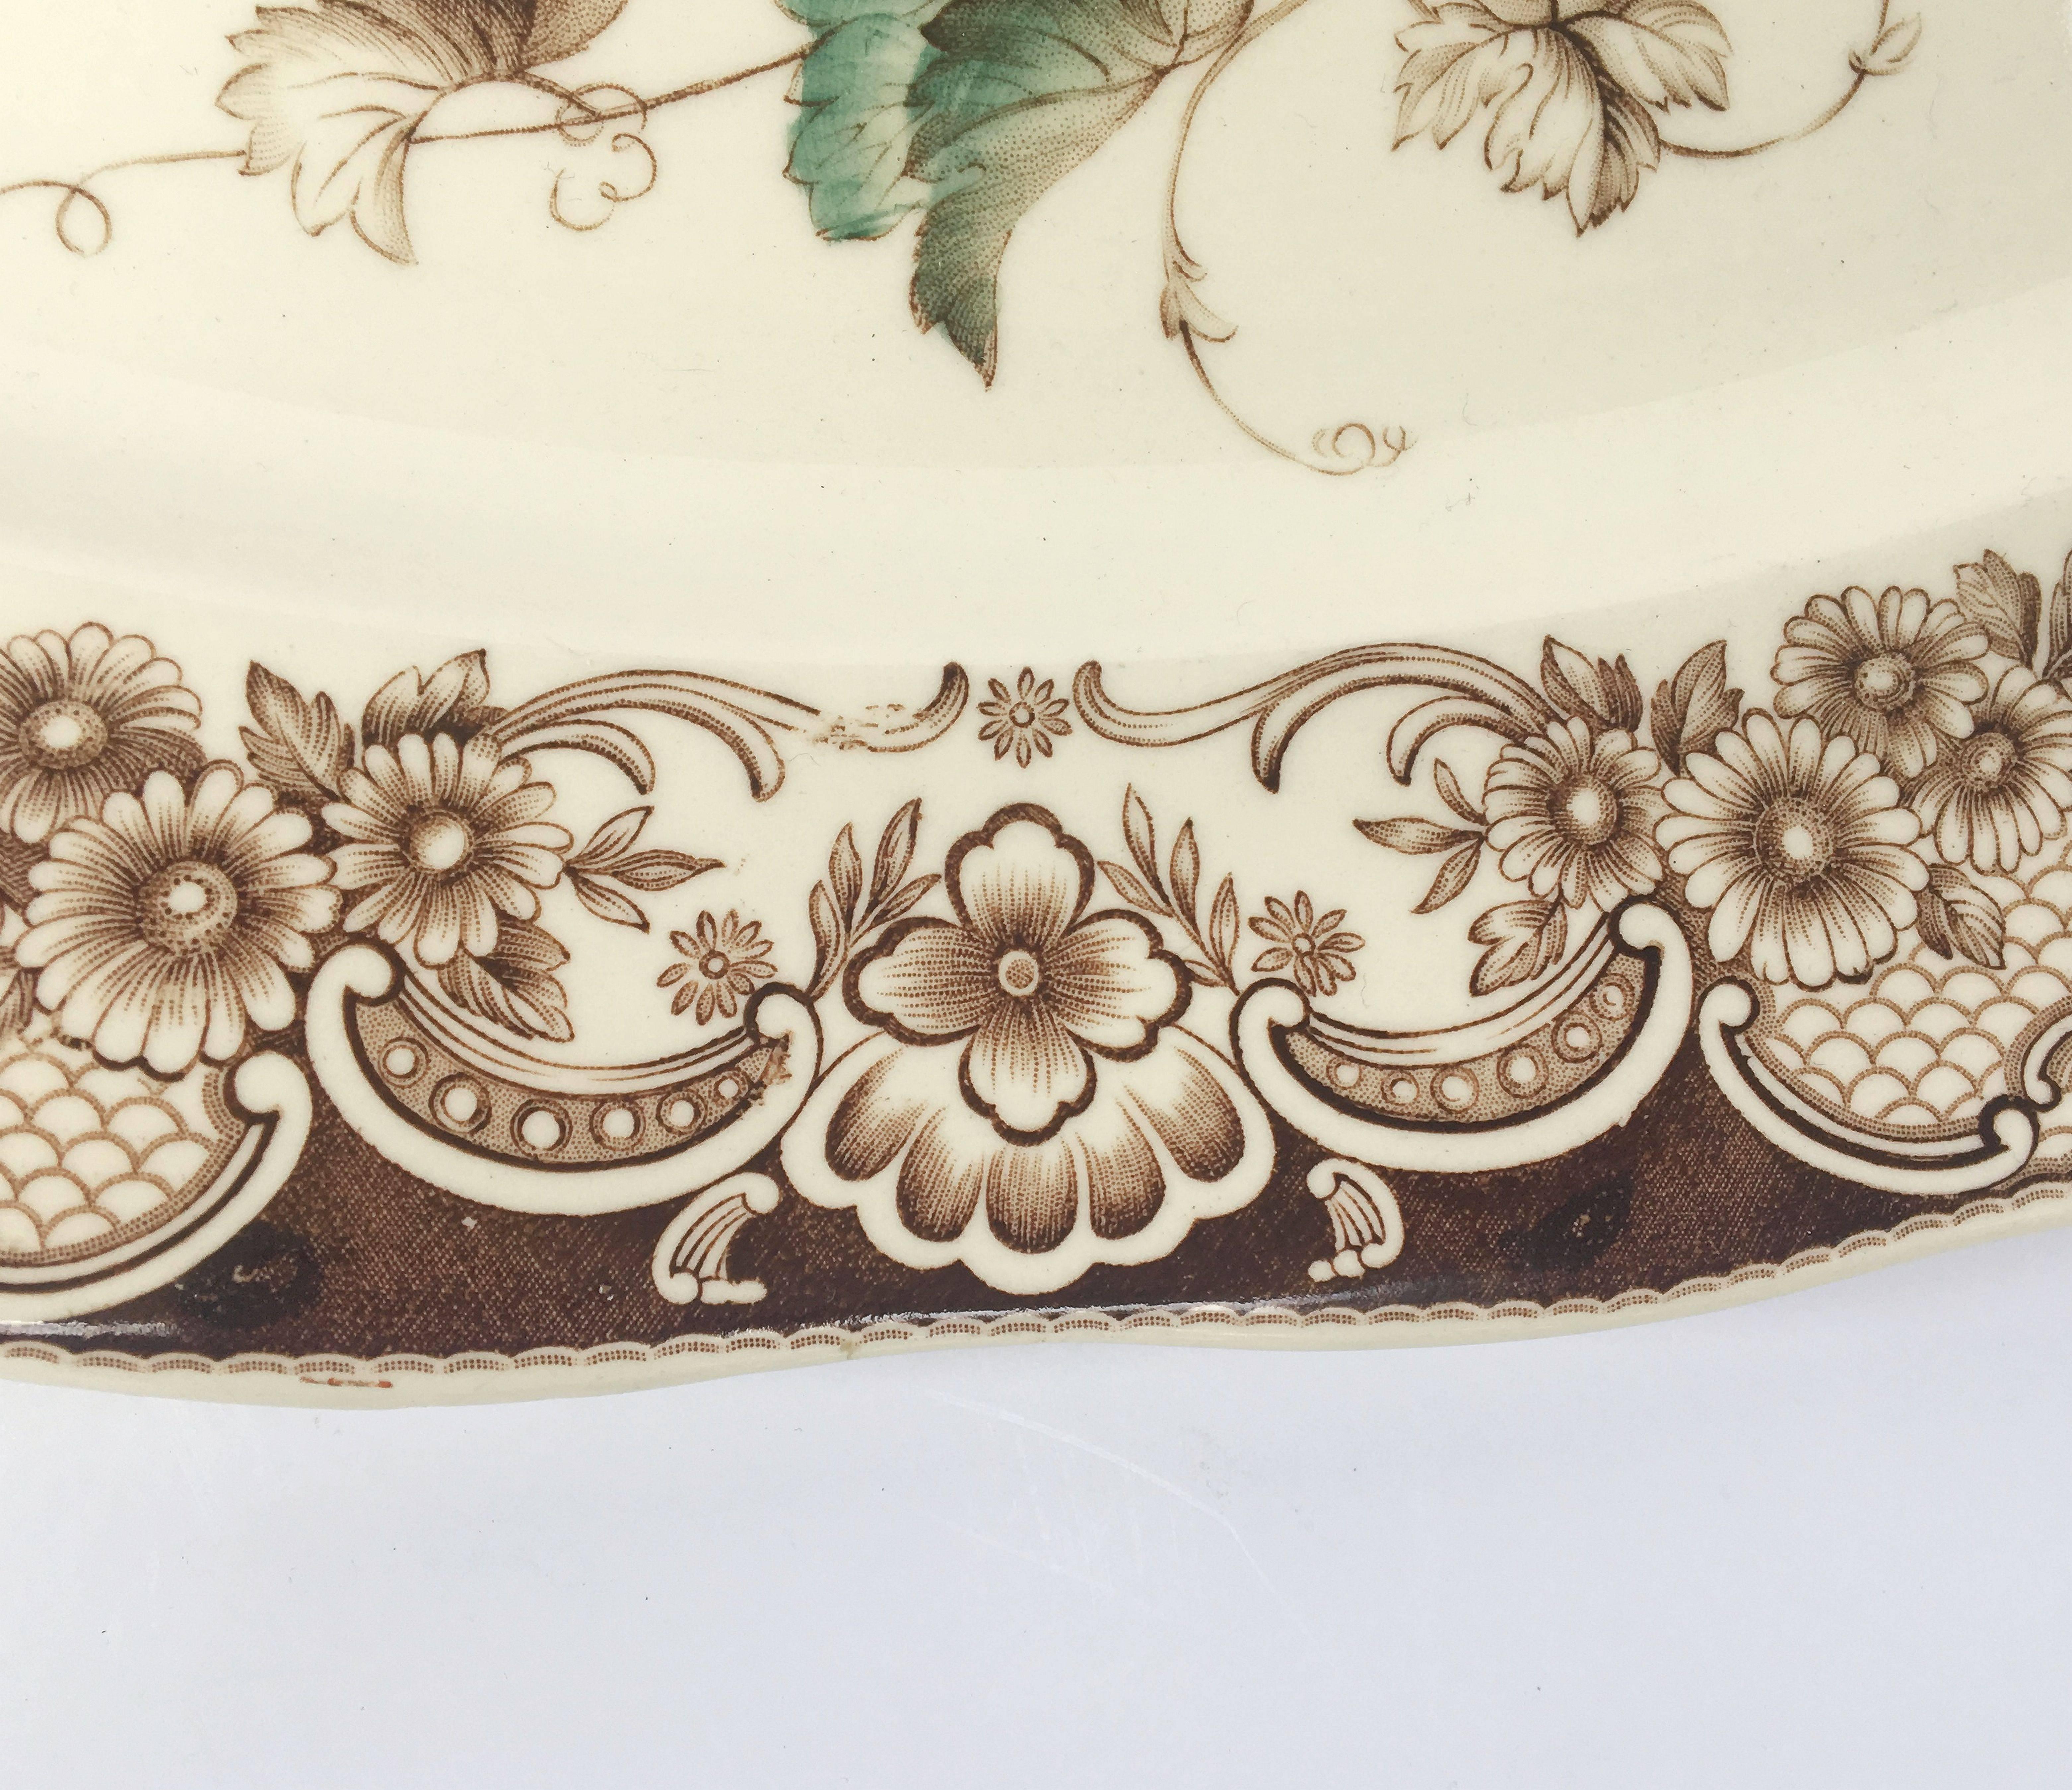 English Transferware Large Platter, Harvest Fruit Pattern by Johnson Brothers In Good Condition For Sale In Austin, TX